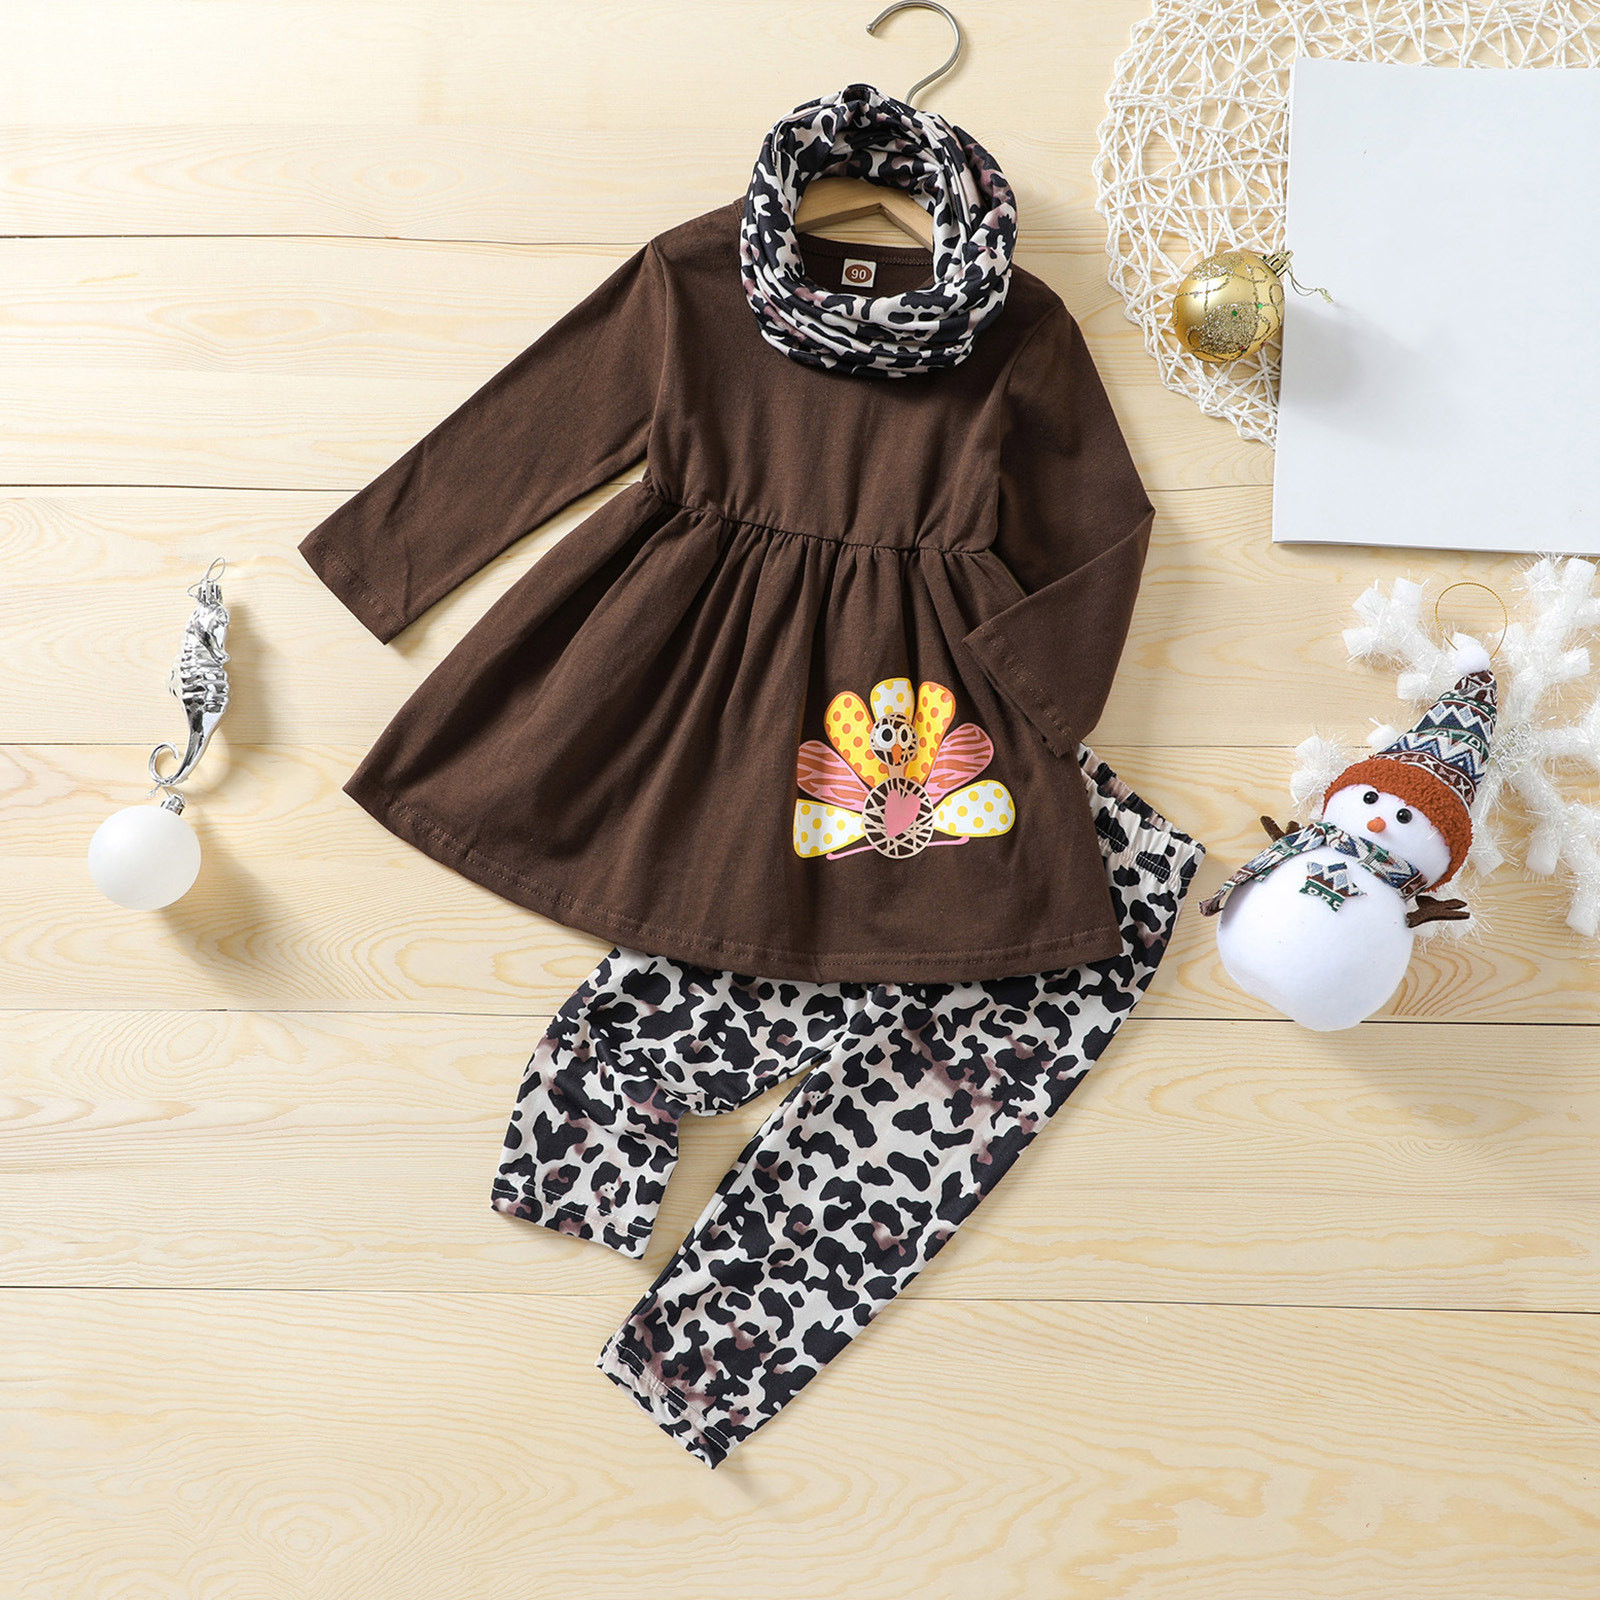 Long Sleeves Teen Girls Thanksgiving Kids Child Baby Girls Cute Cartoon Long Sleeve Dress Blouse Tops Leopard Print Pants Trousers With Headbands Clothes Set 3PCS Cute Outfit Kid Girl - image 2 of 9